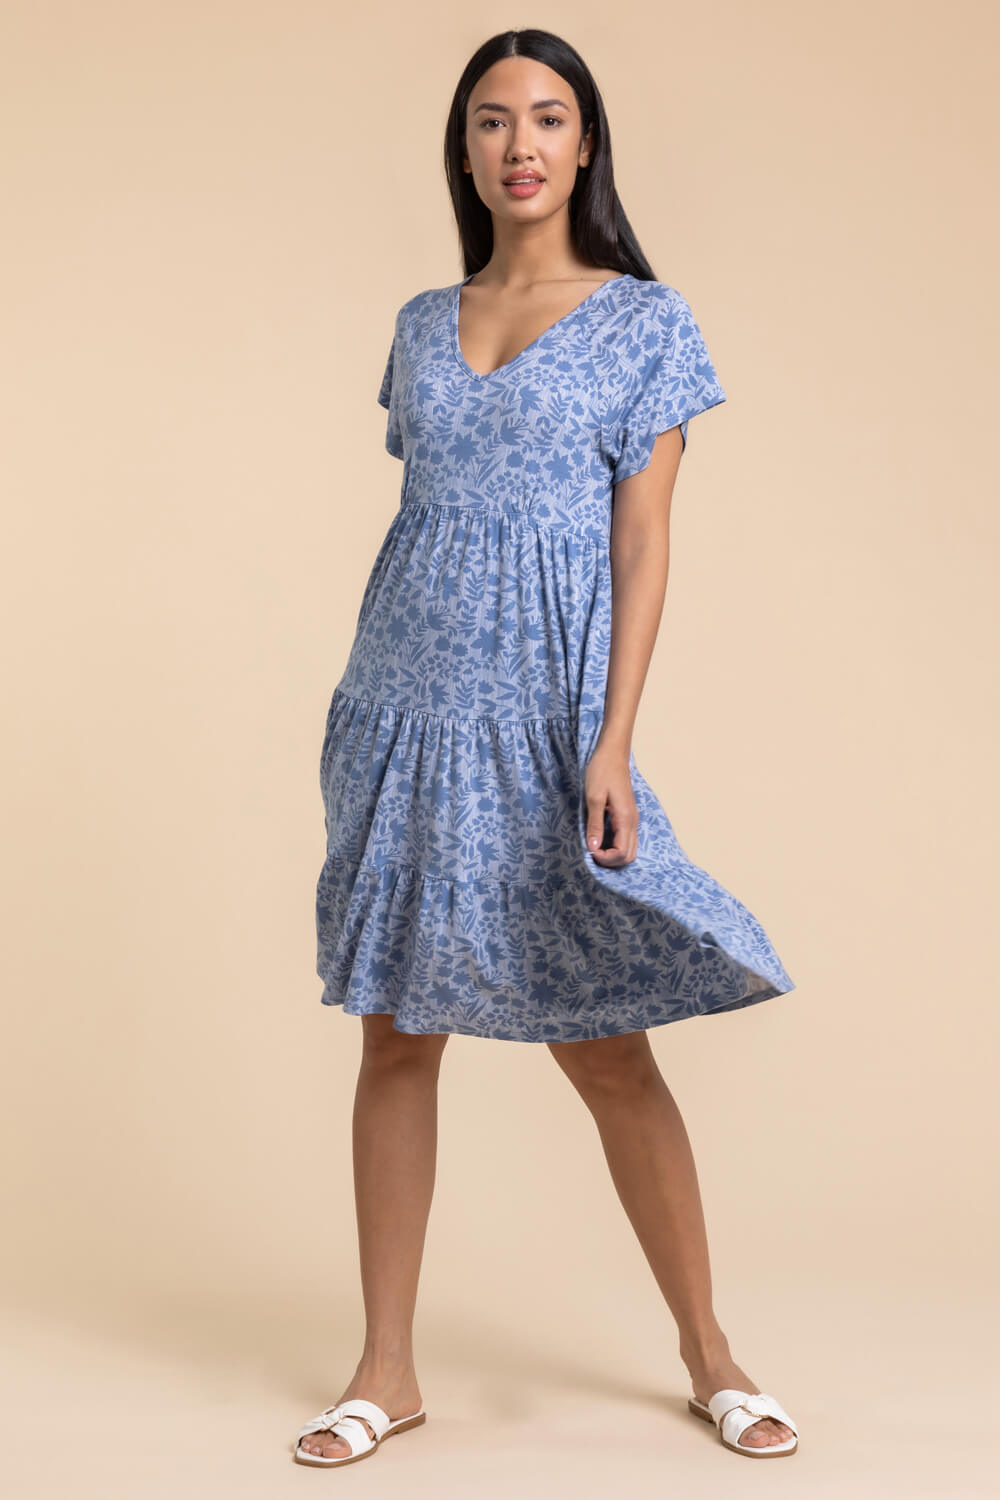 Blue Tiered Floral Print Stretch Dress, Image 3 of 4